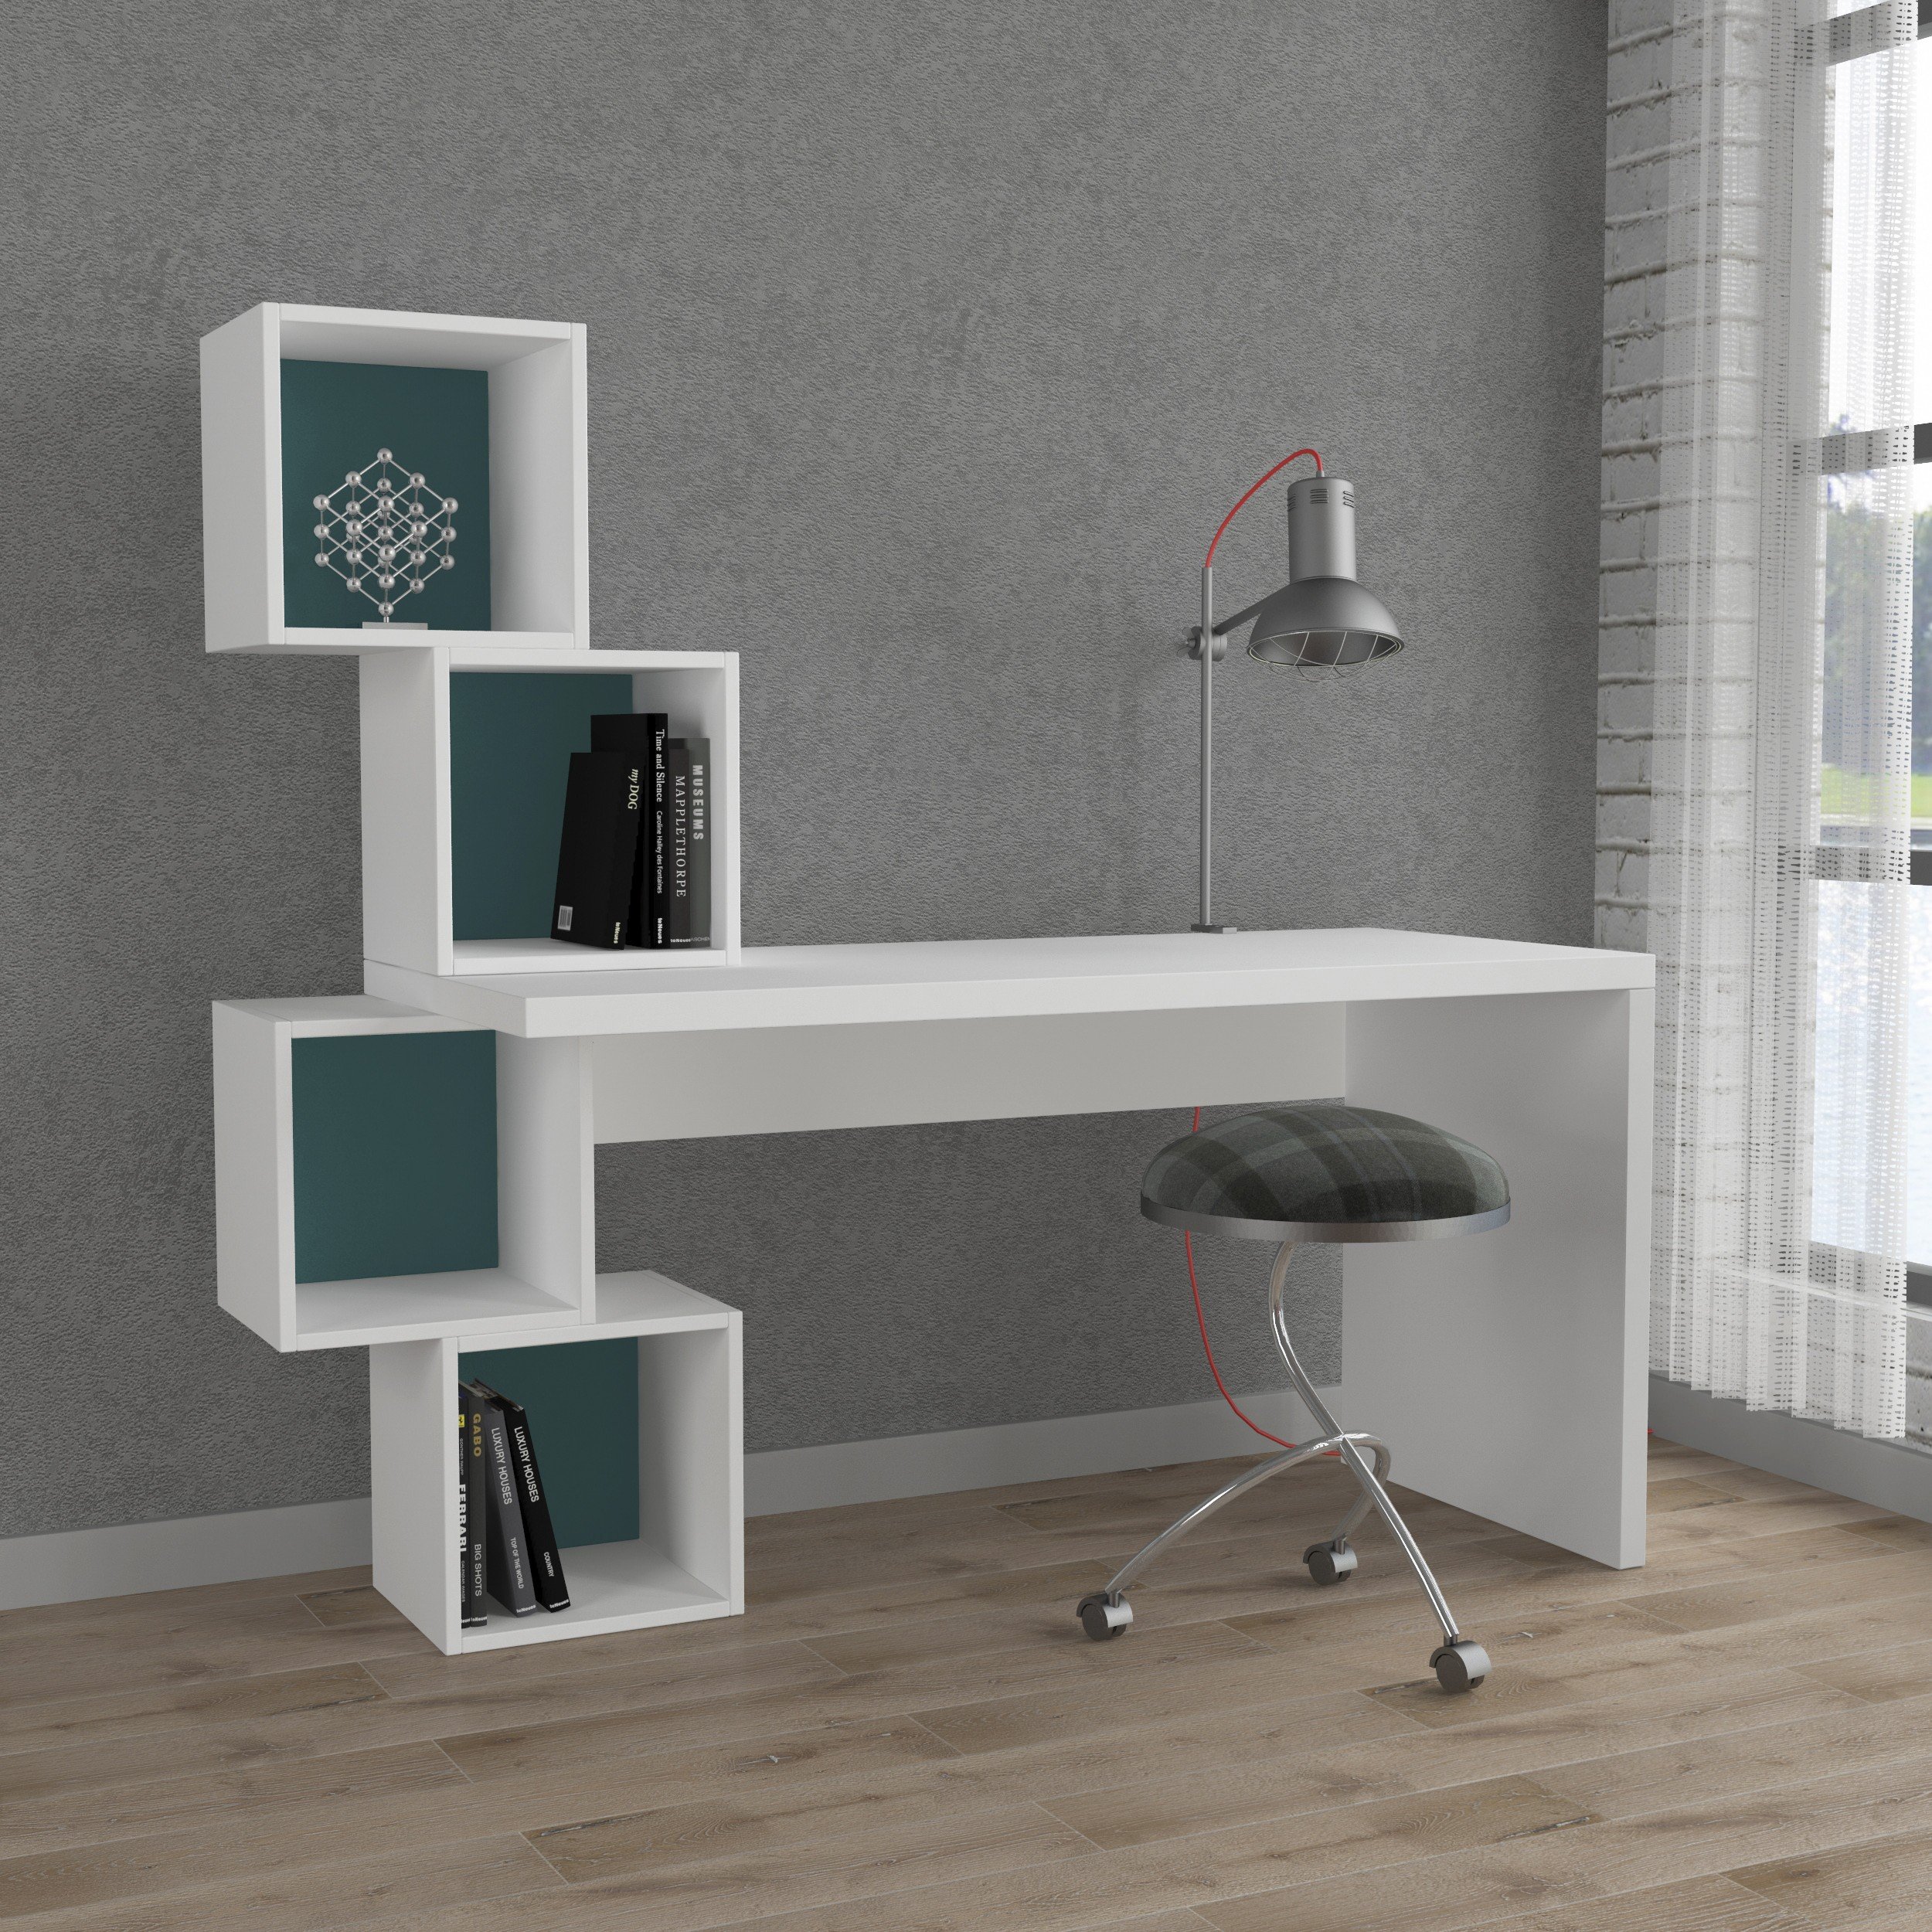 BALANCE WORKING TABLE - WHITE - TURQUOISE M.MS.10962.8